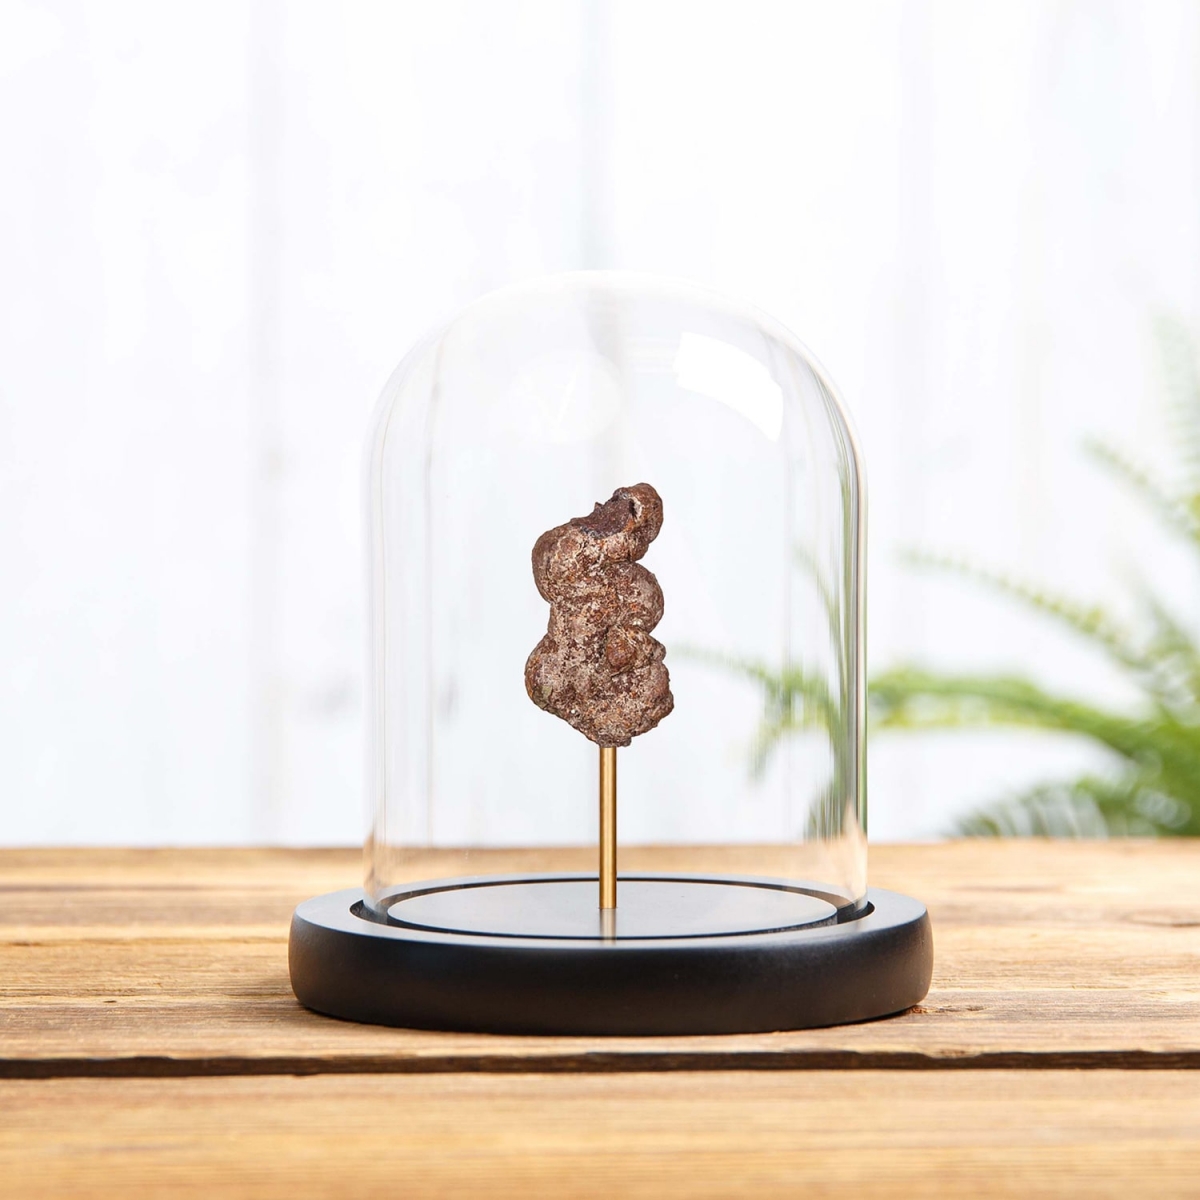 Minibeast Small Fossilised Dinosaur Poo in Glass Dome with Wooden Base (Coprolite)